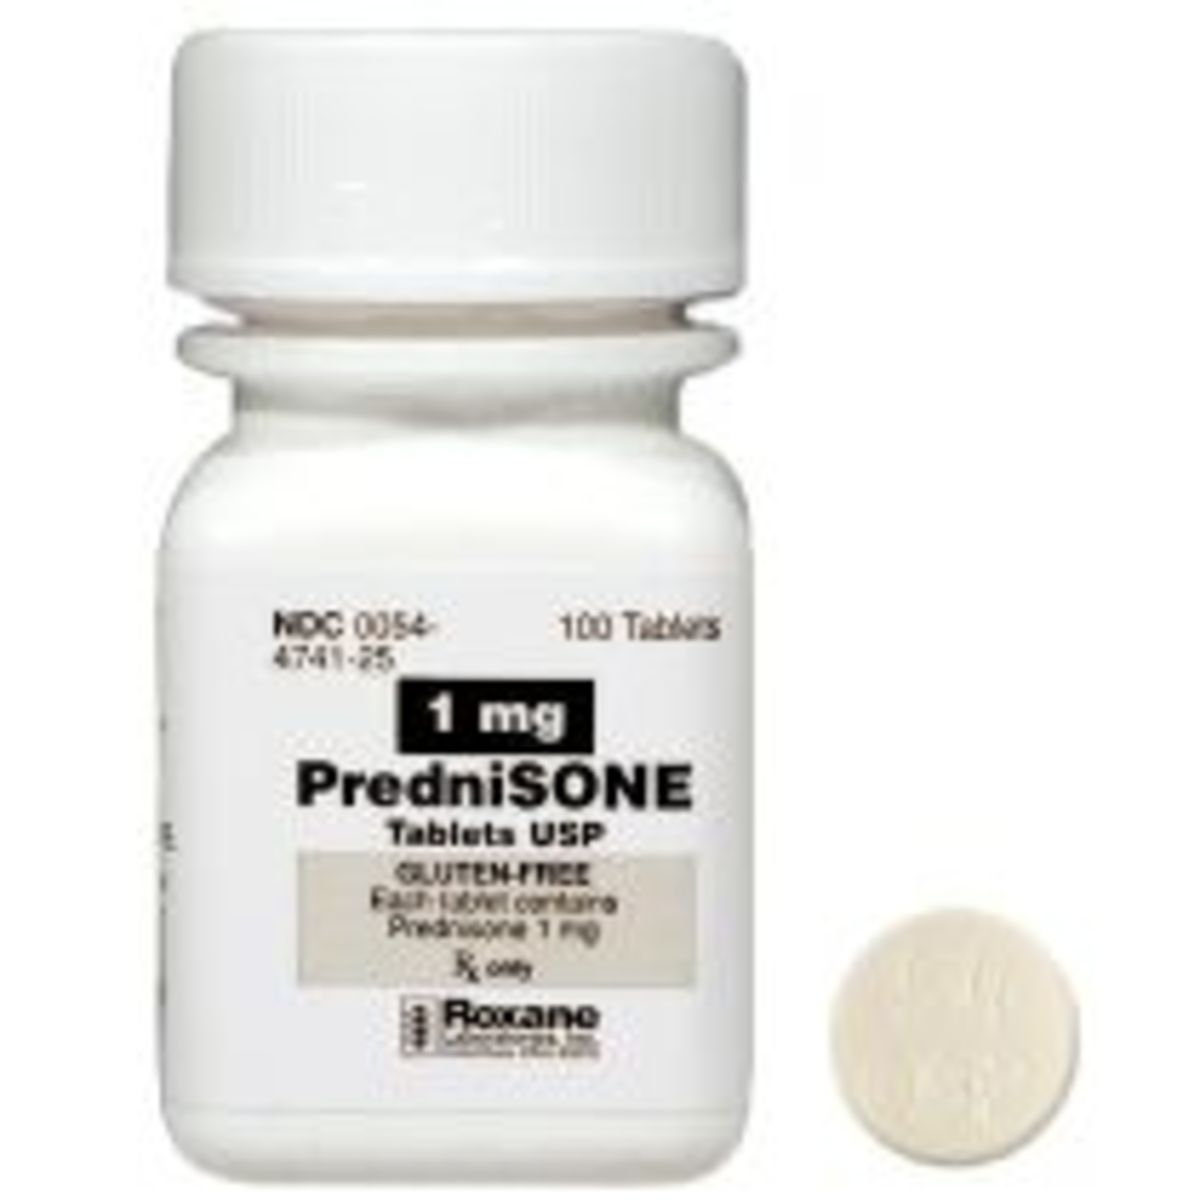 Prednisone does have commonly felt side effects